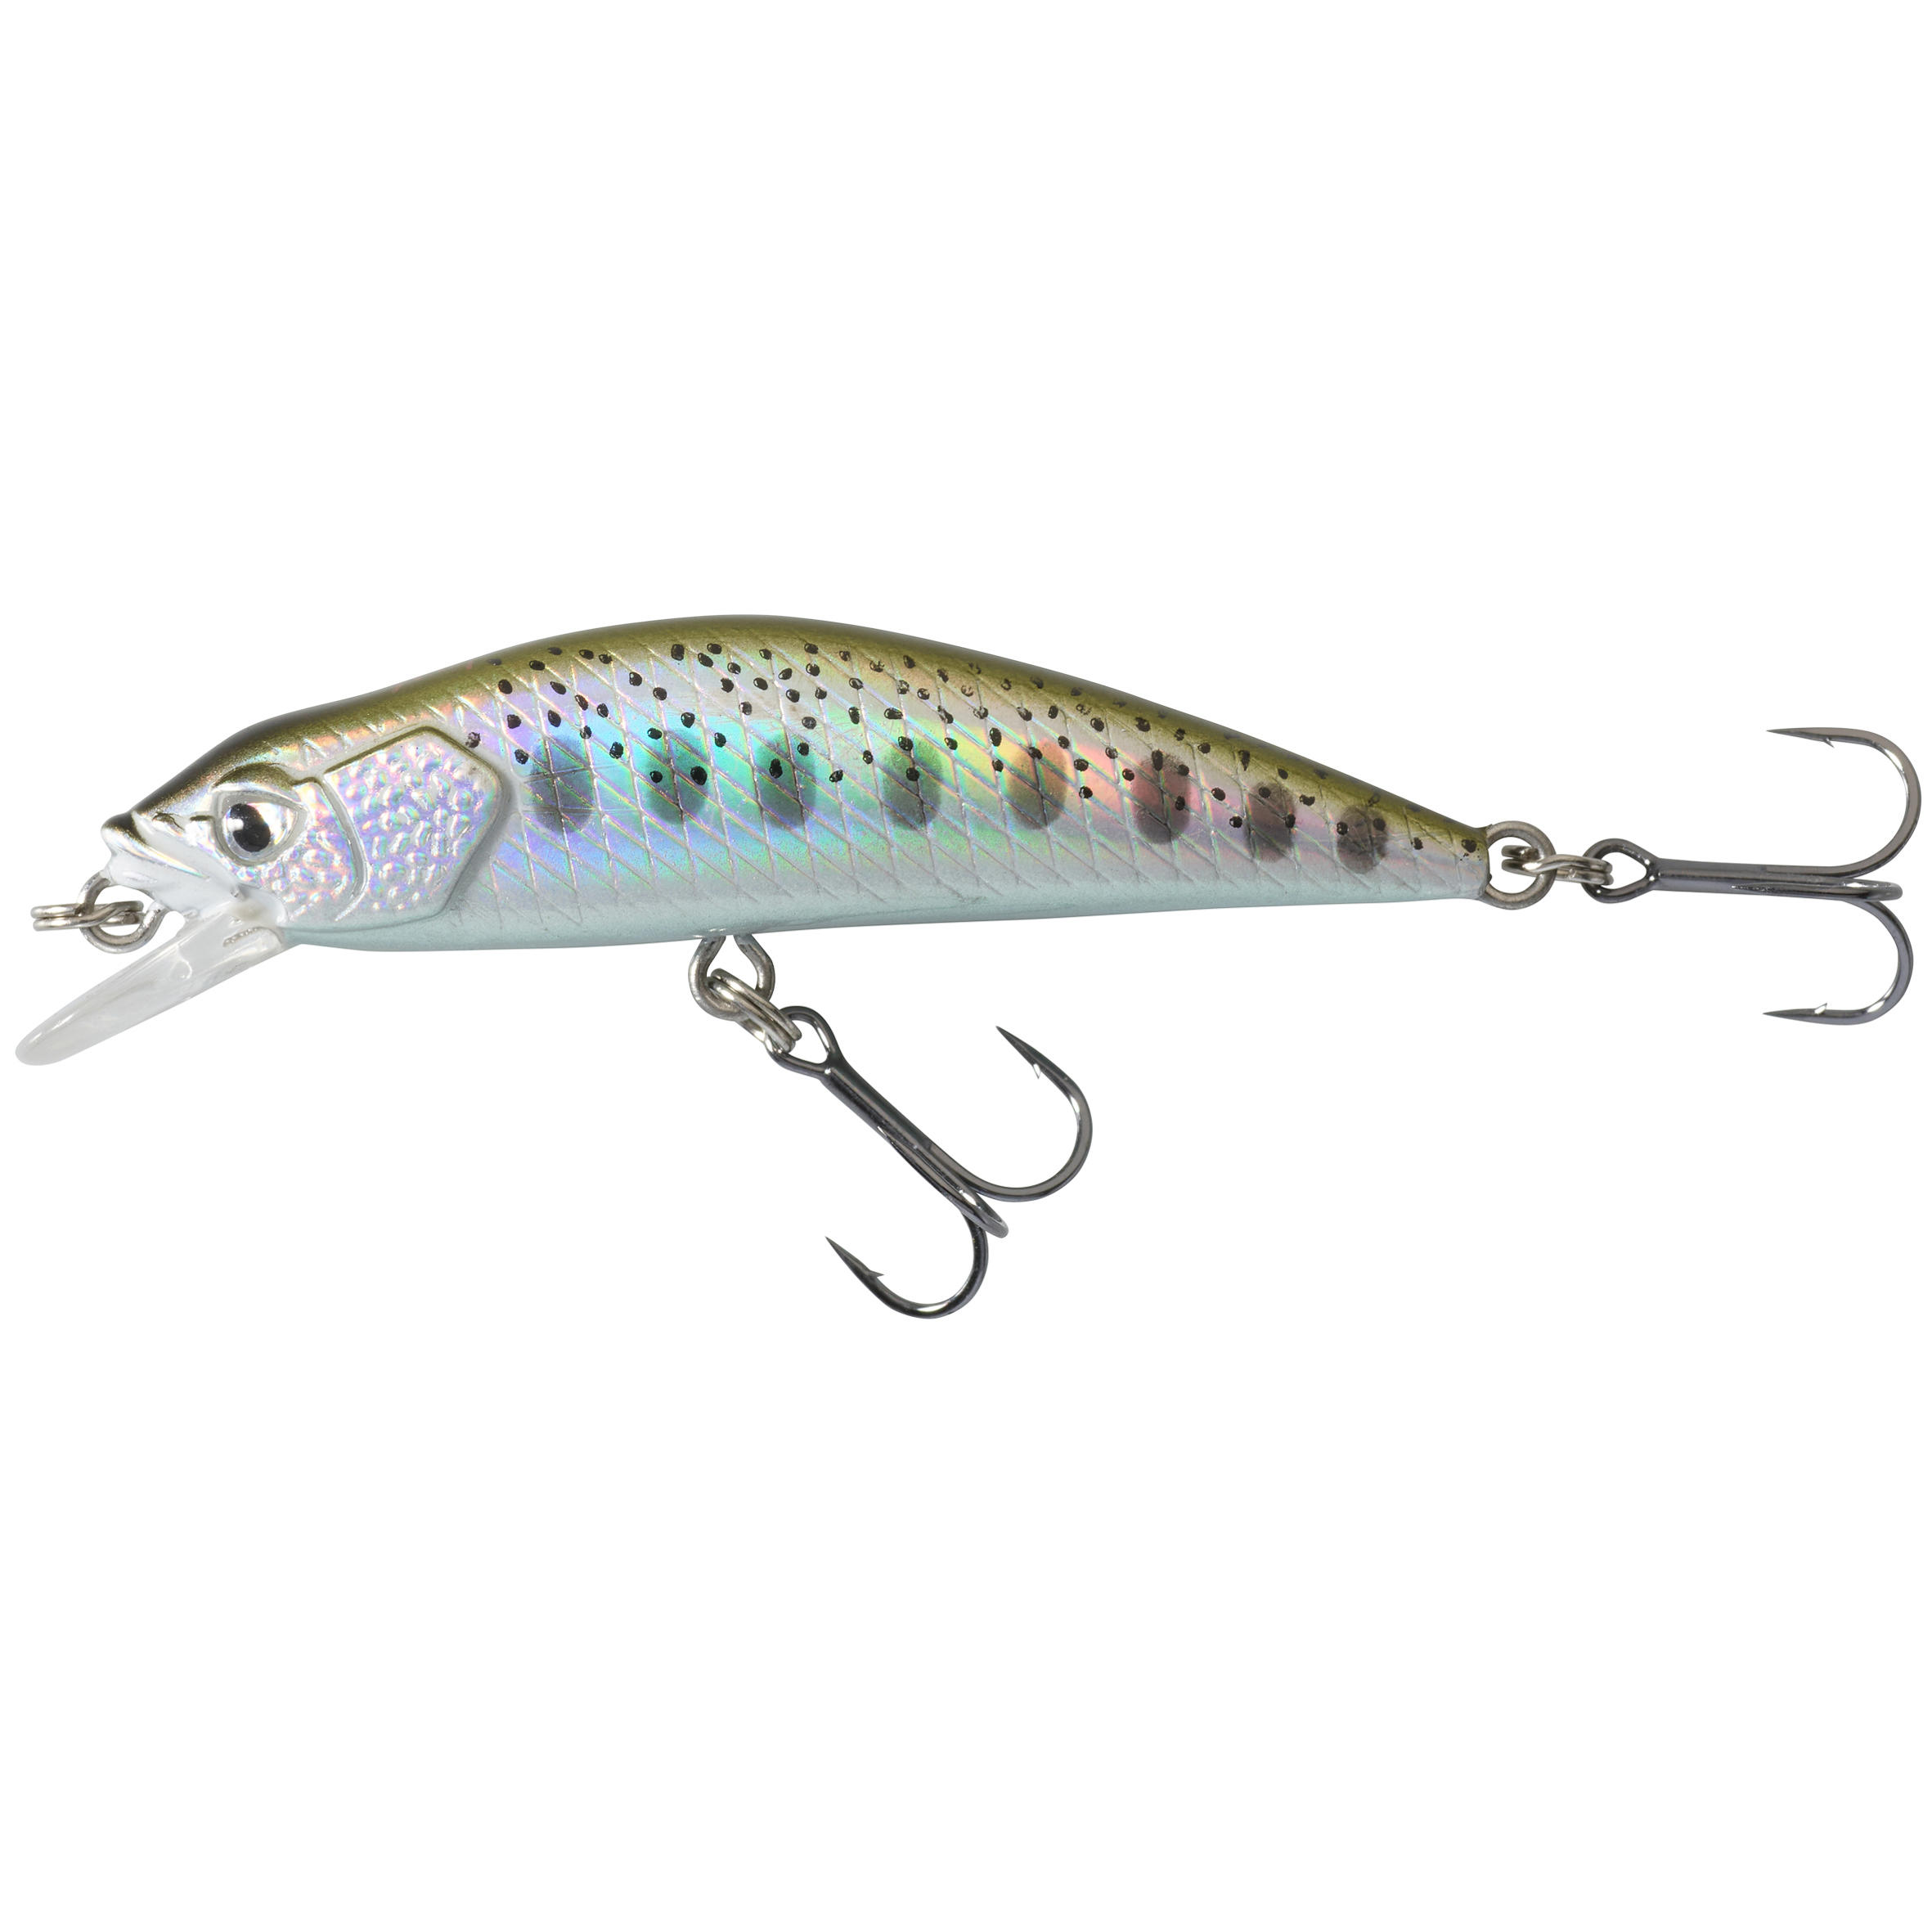 CAPERLAN MINNOW HARD LURE FOR TROUT WXM  MNWFS US 50 YAMAME